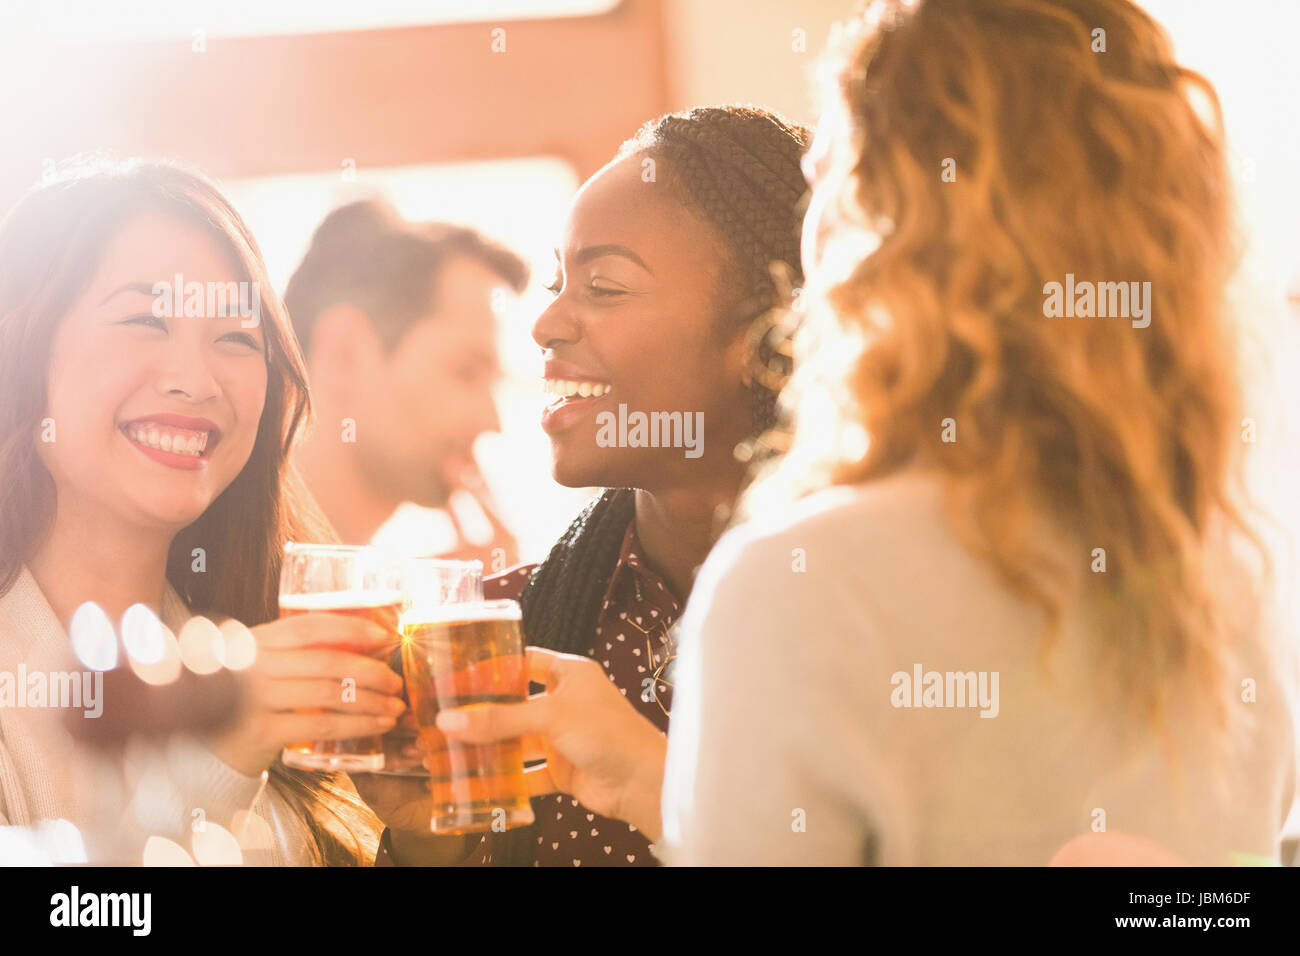 Smiling women friends toasting beer glasses in bar Stock Photo